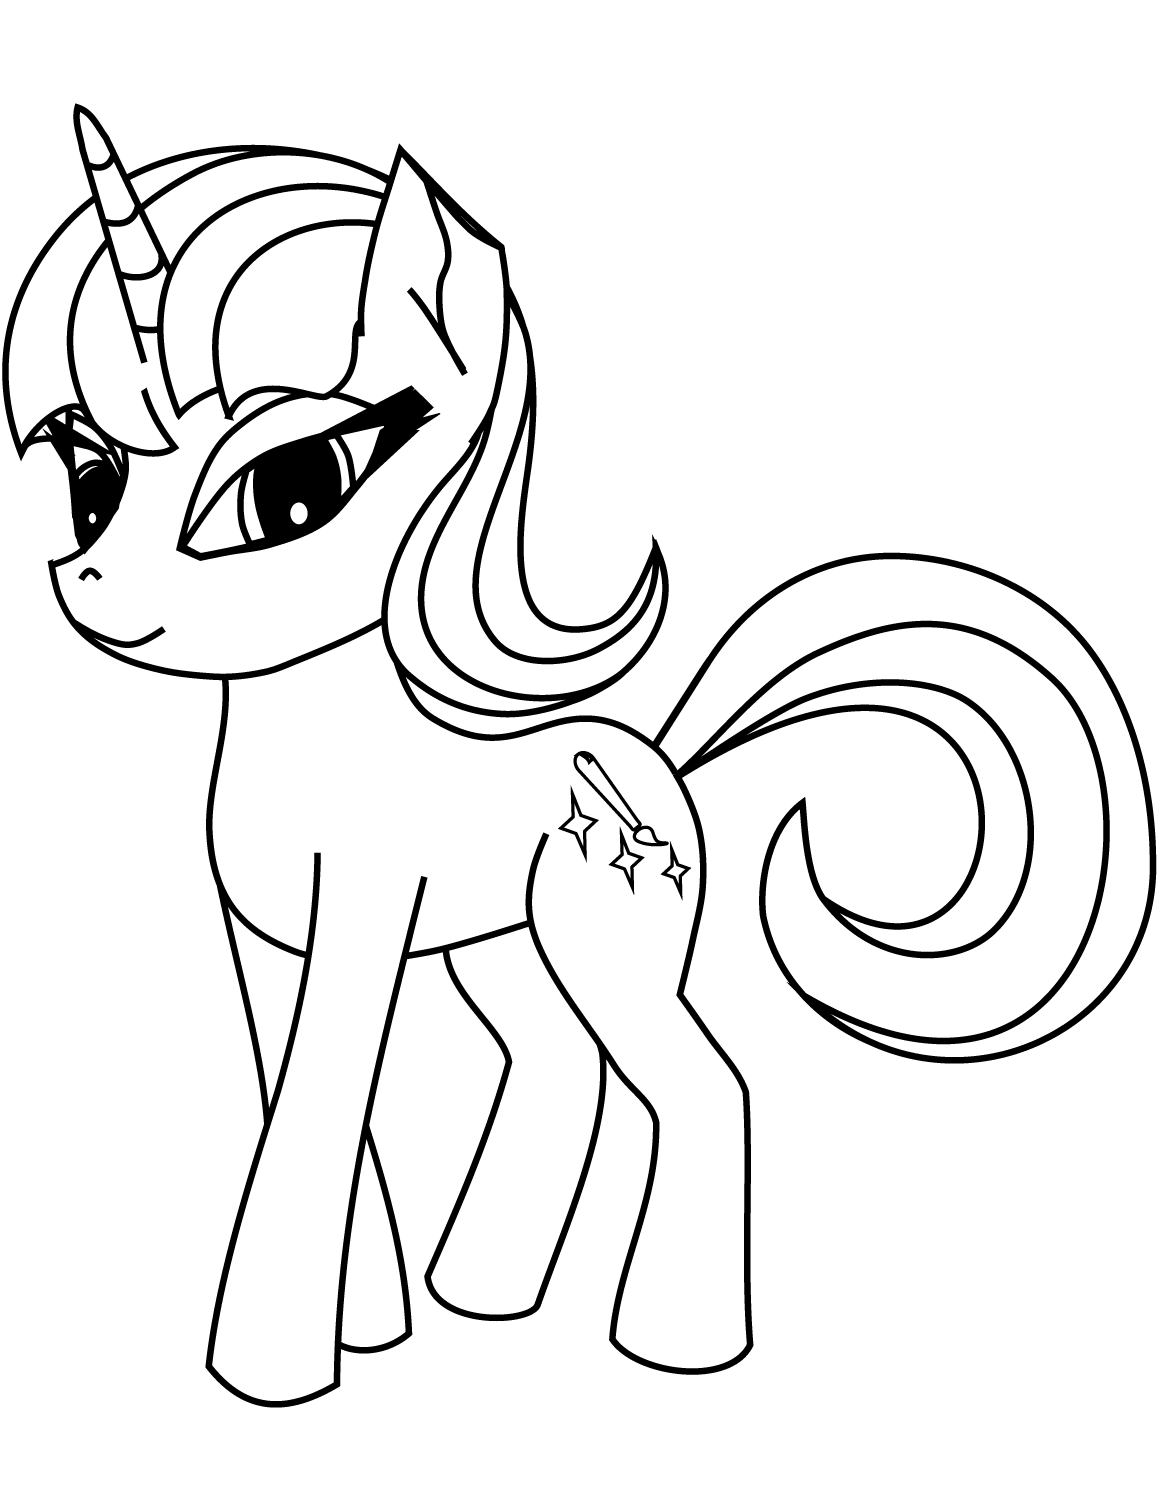 Cute Pony Unicorn 2 Coloring Page